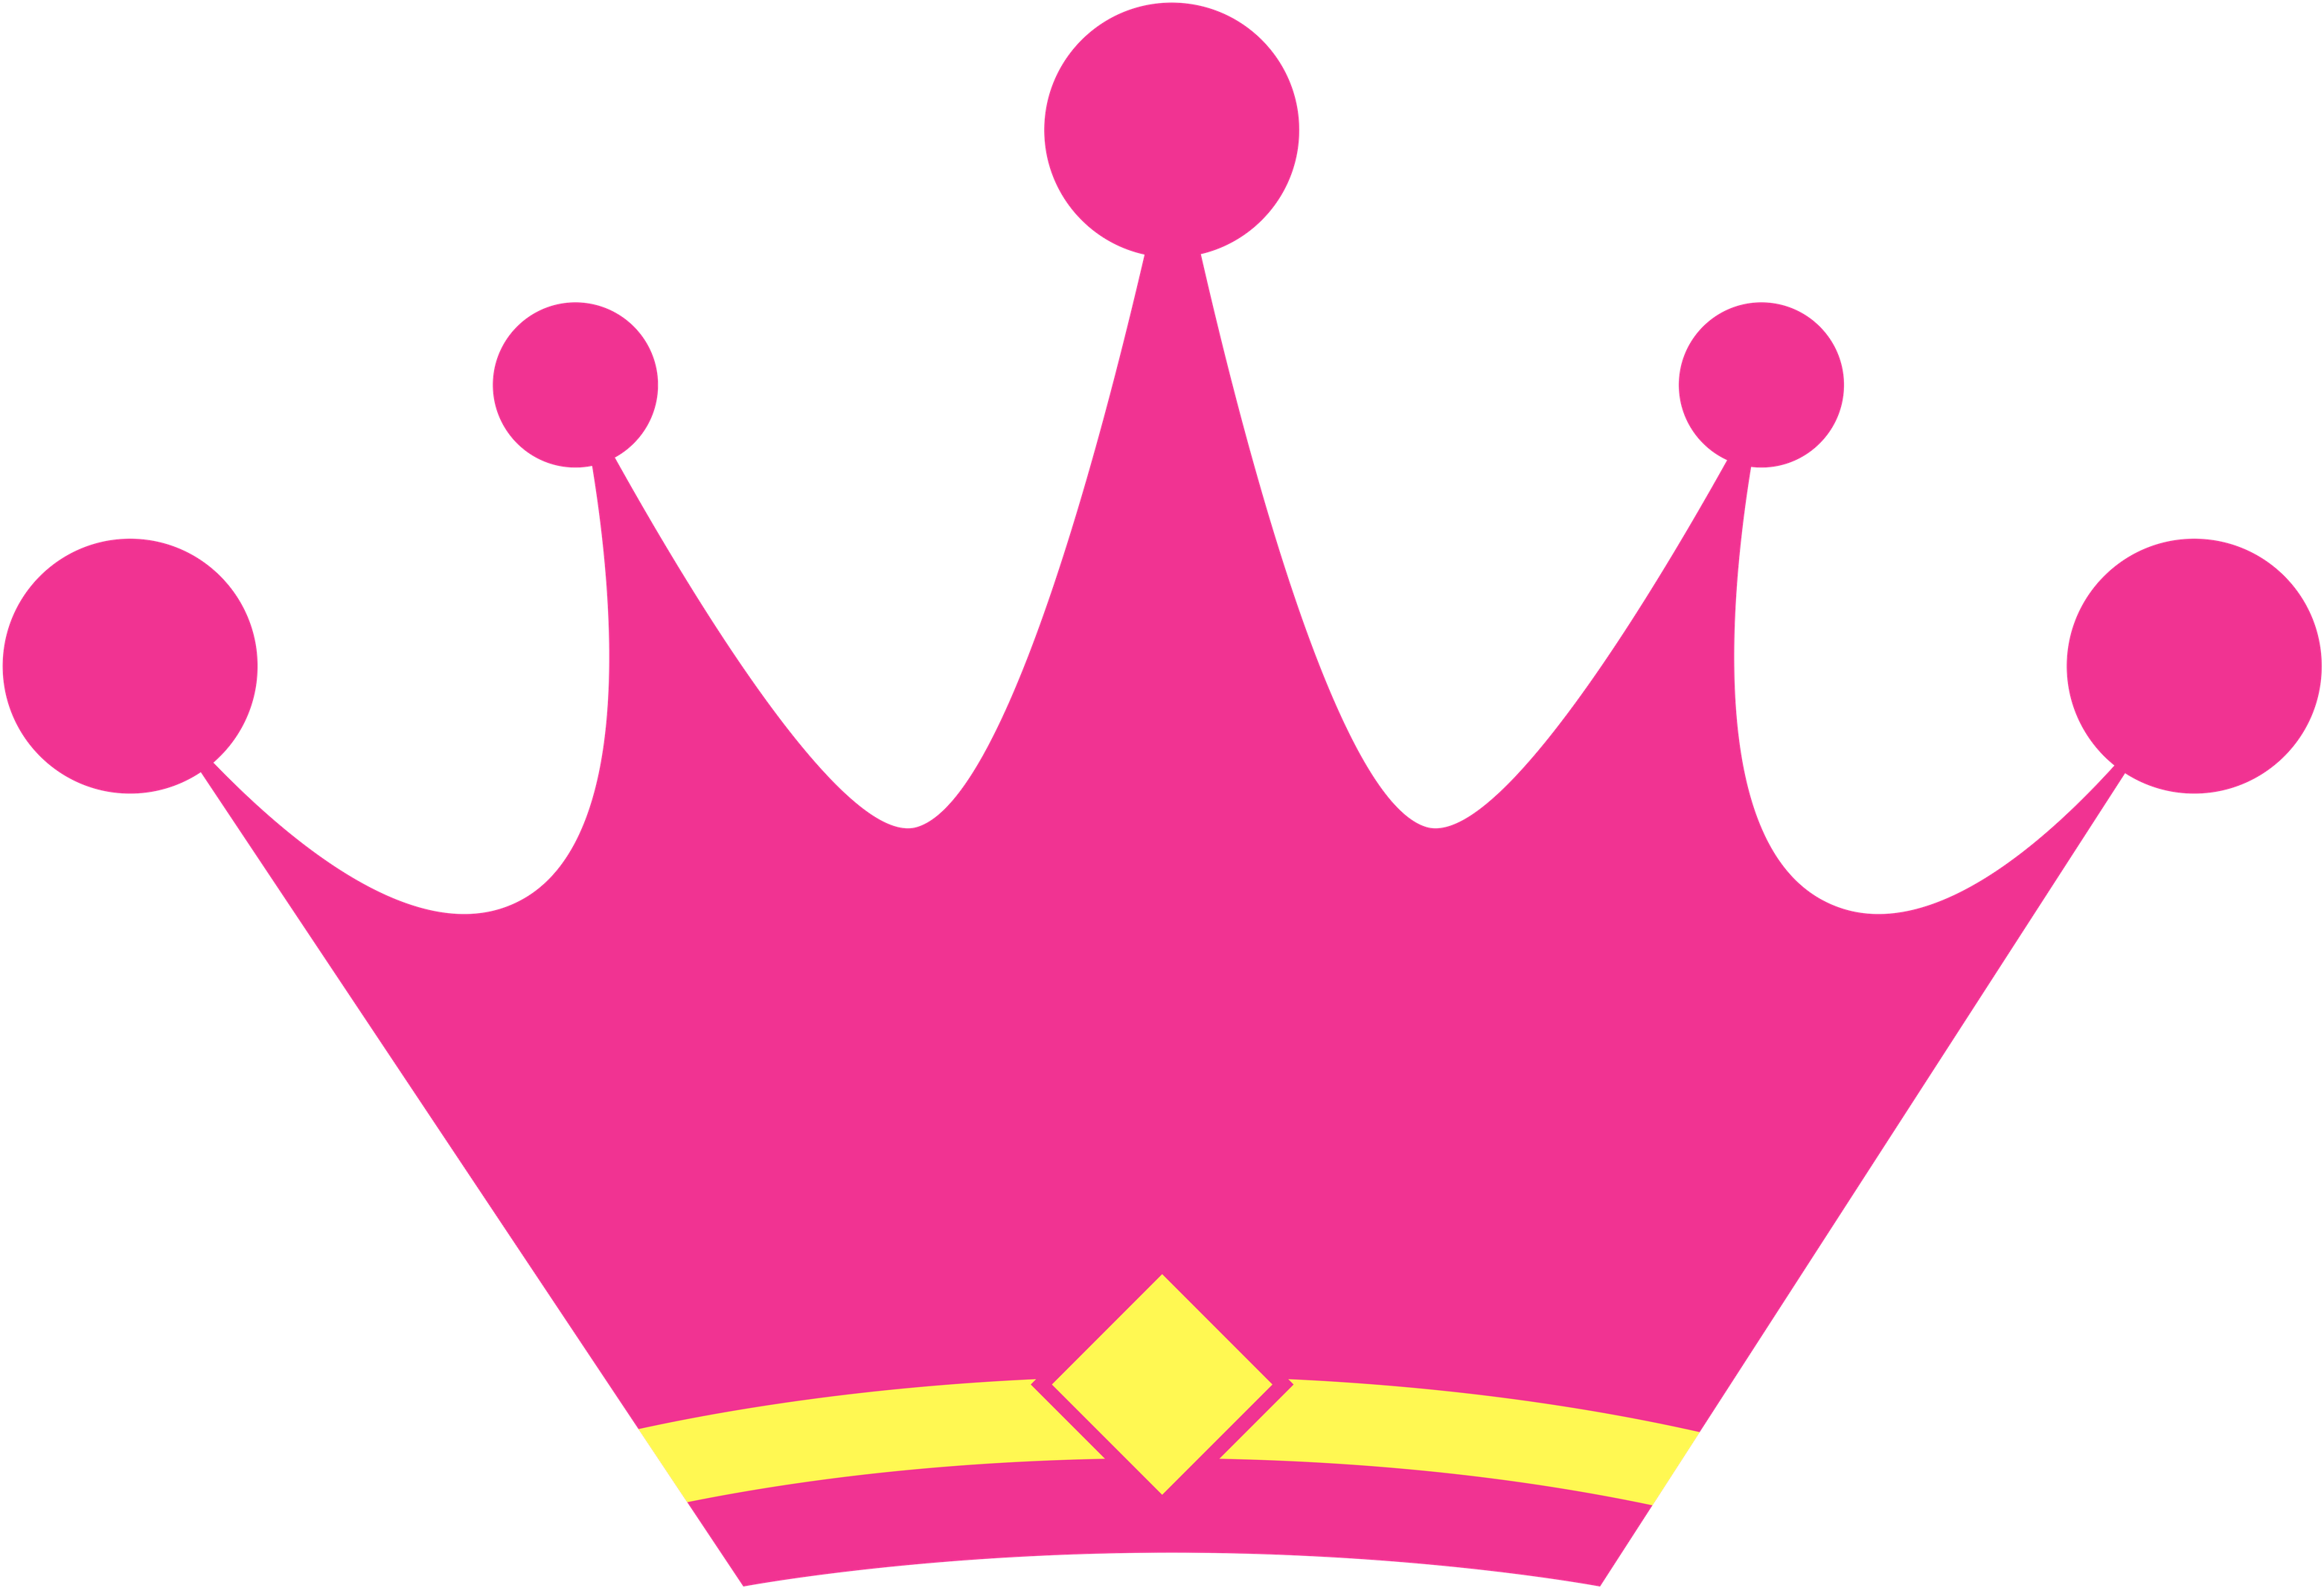 Magic Wishing Well™ Giving Back Dancing Princess Parties - Chin Up Princess Or The Crown Slips (5000x5000)